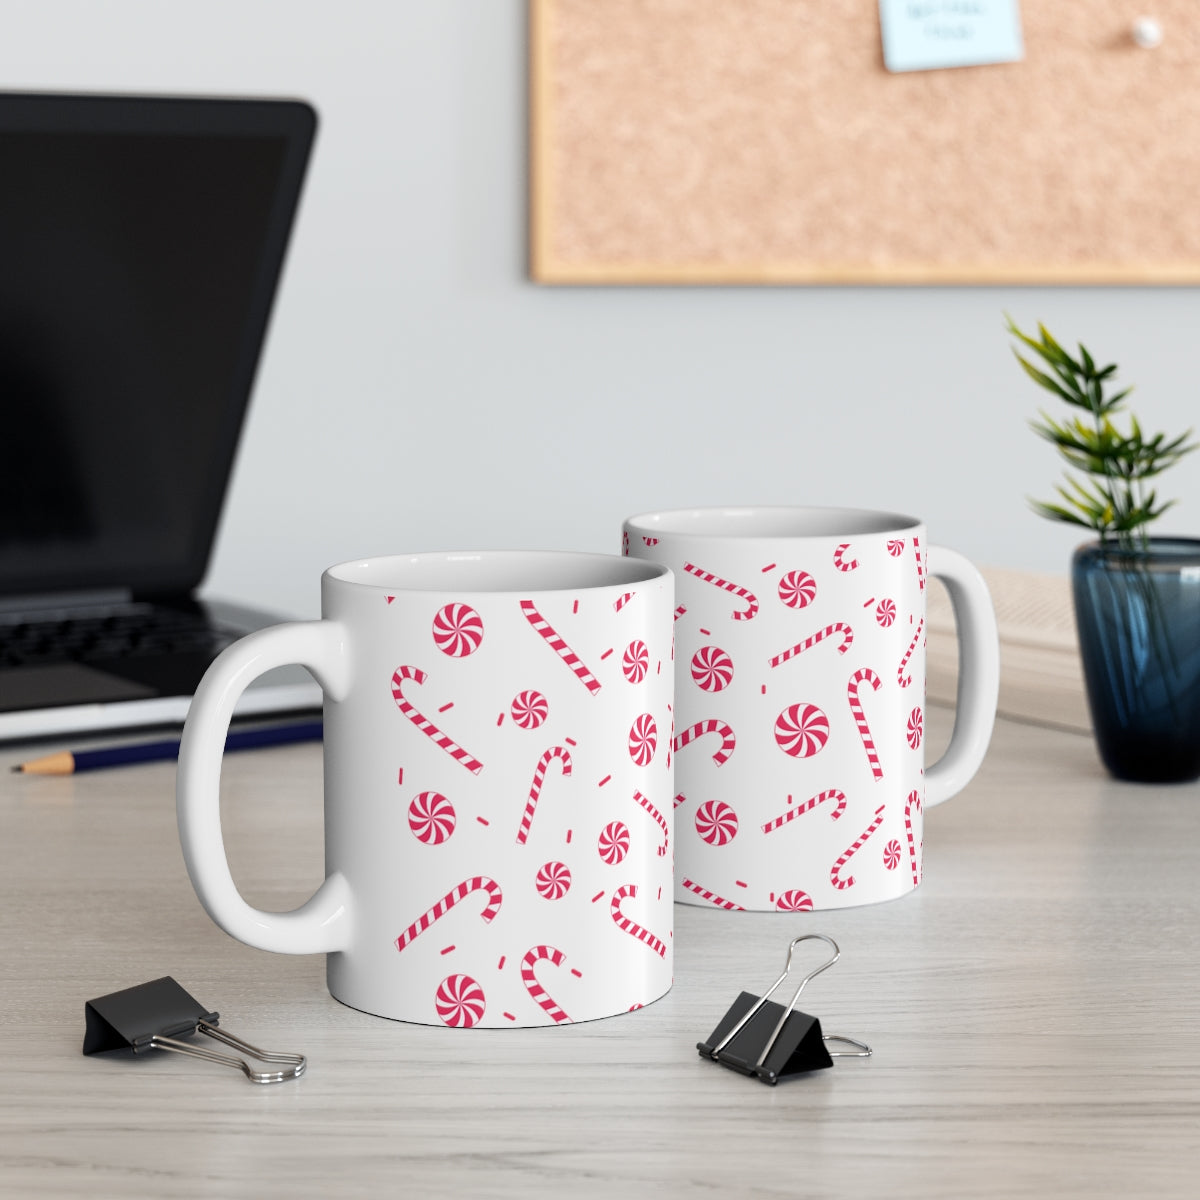 Mock up of 2 mugs on a surface with a computer laptop in the distance